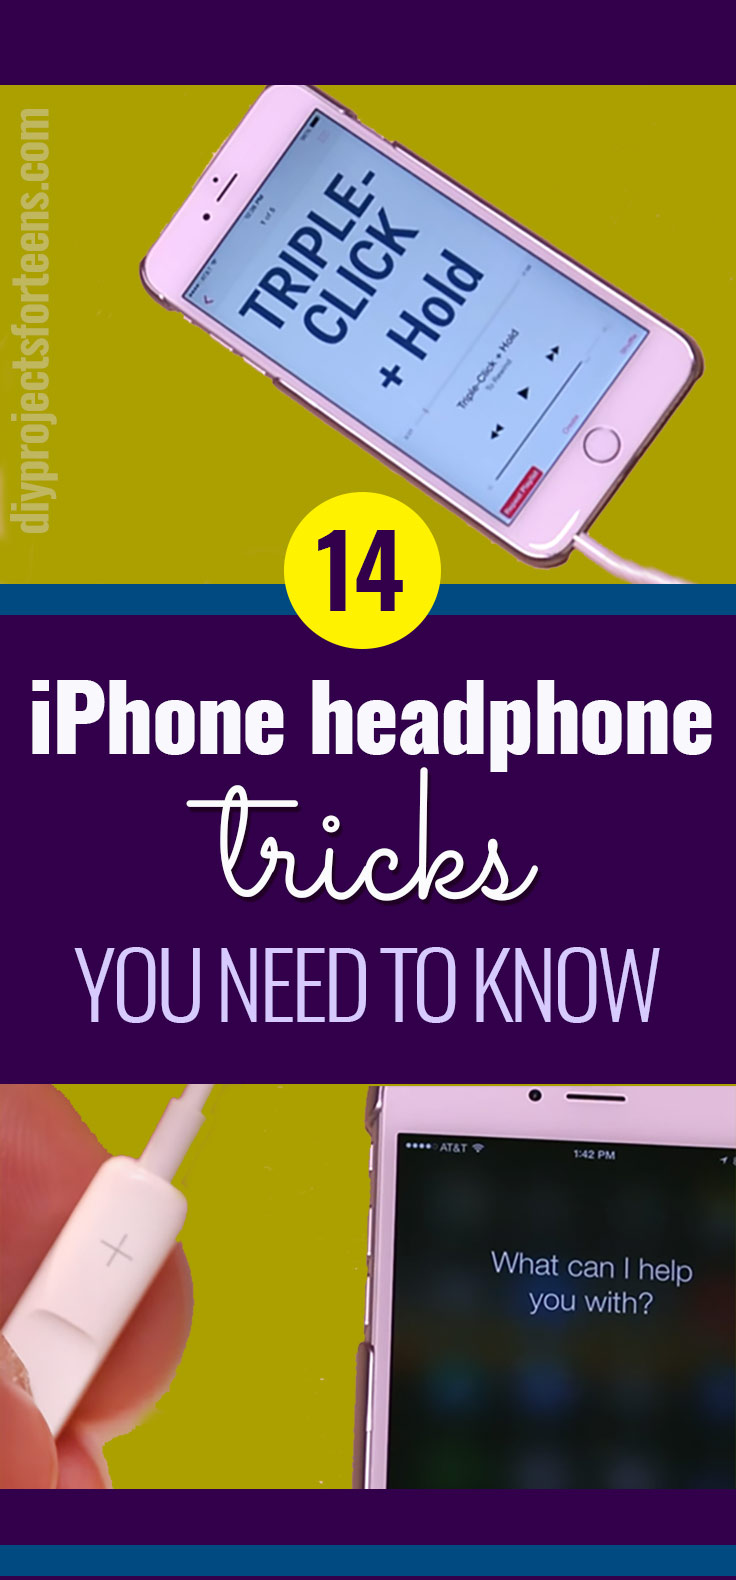 Cool iphone headphone tricks - Tips for using IPHONE headphones for IOS devices like phone and ipad. Control headphones and find little tricks you did not know existed